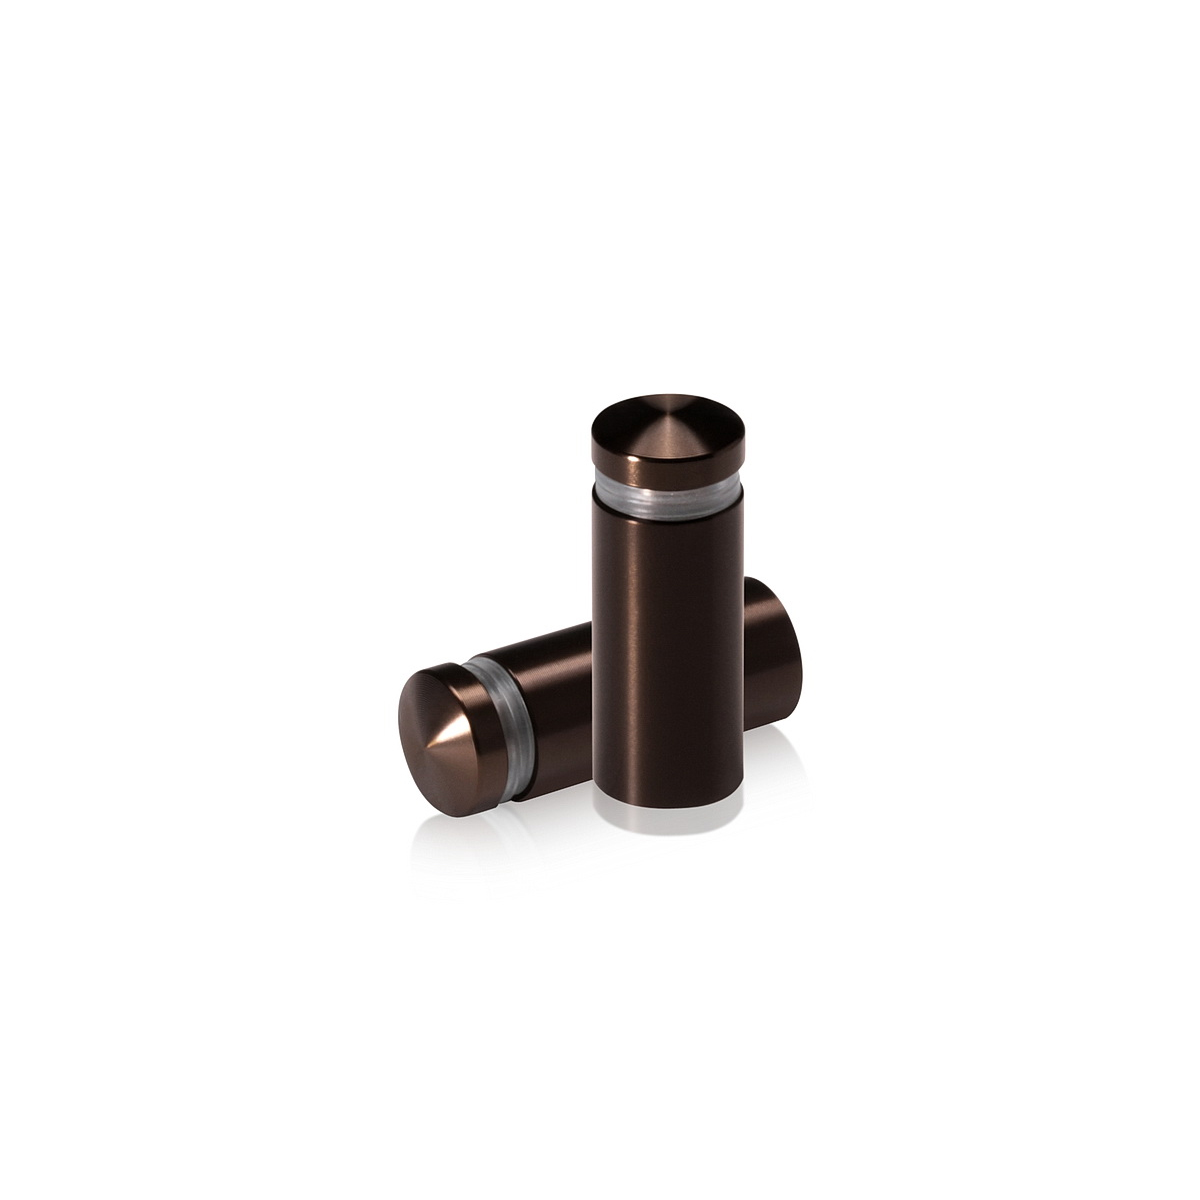 1/2'' Diameter X 1'' Barrel Length, Aluminum Rounded Head Standoffs, Bronze Anodized Finish Easy Fasten Standoff (For Inside / Outside use) [Required Material Hole Size: 3/8'']